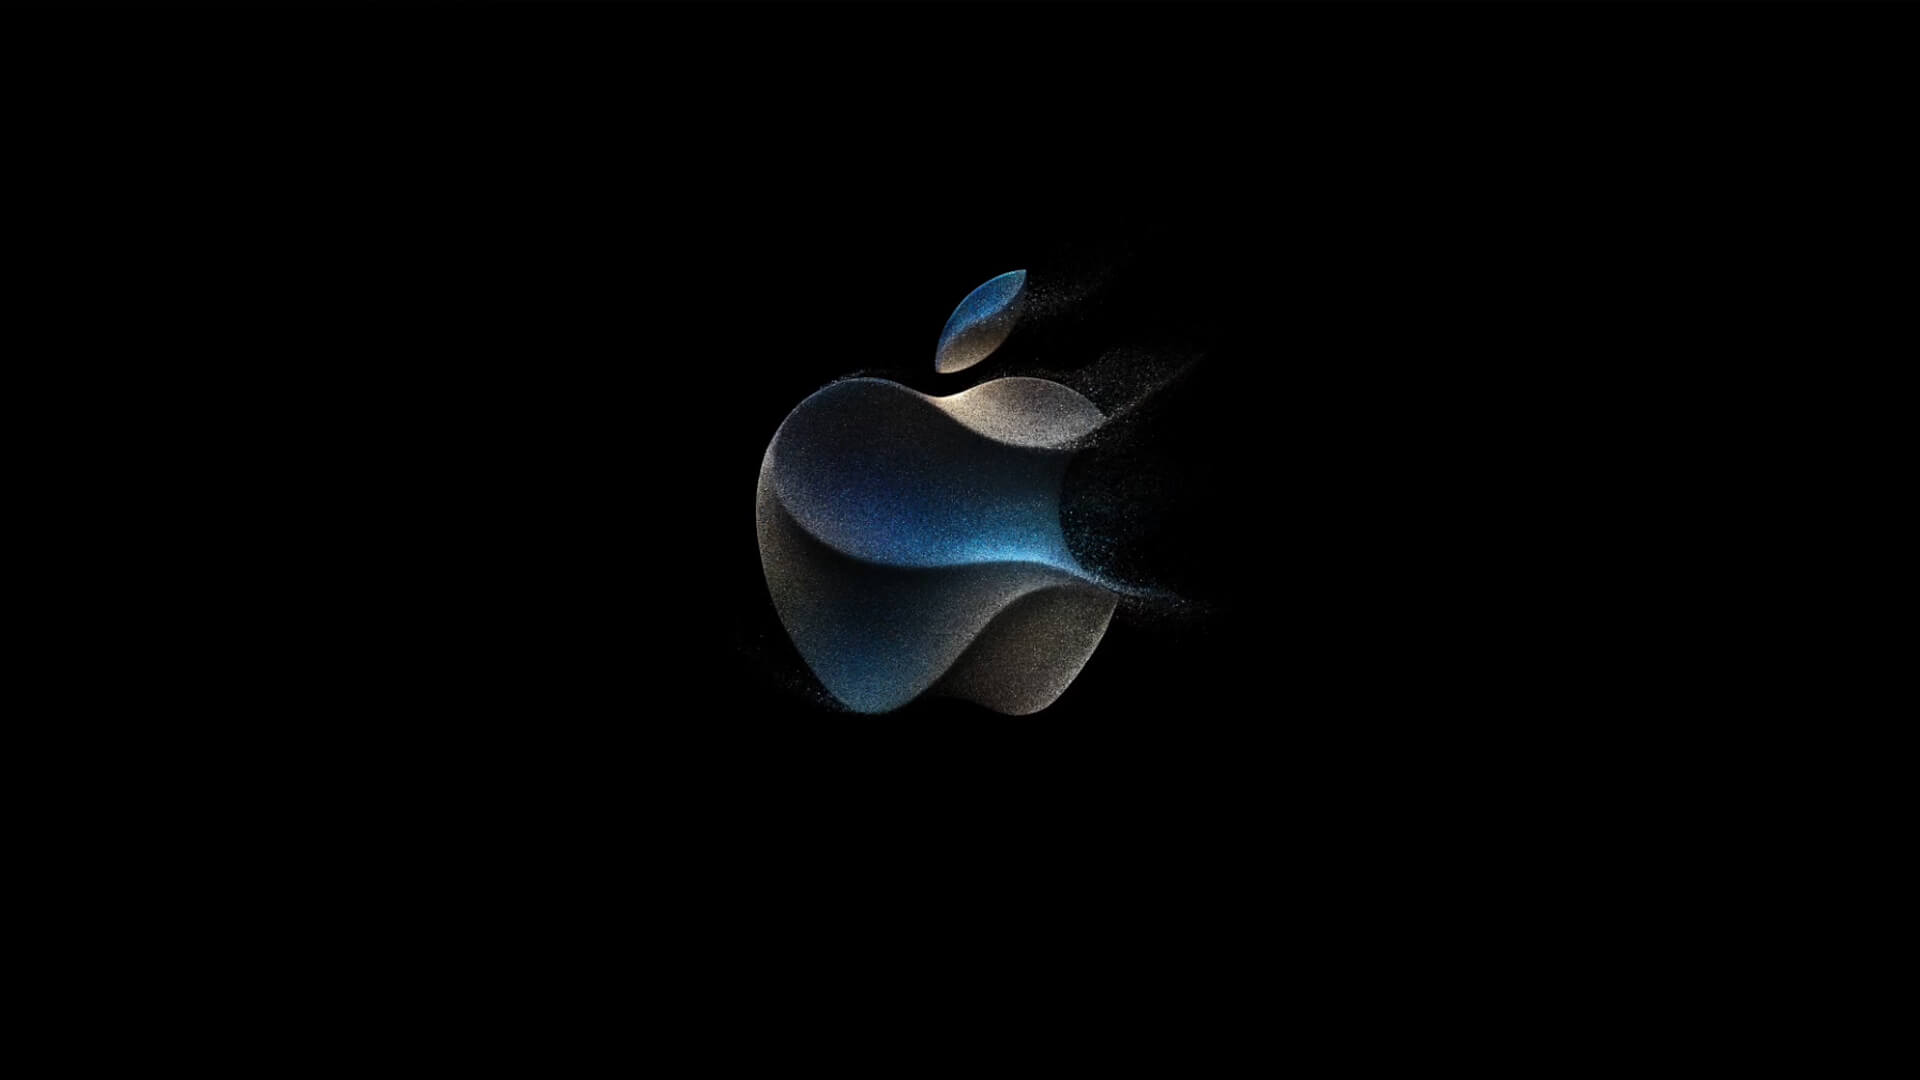 Apple's September 12th Presentation: A Review of Innovations